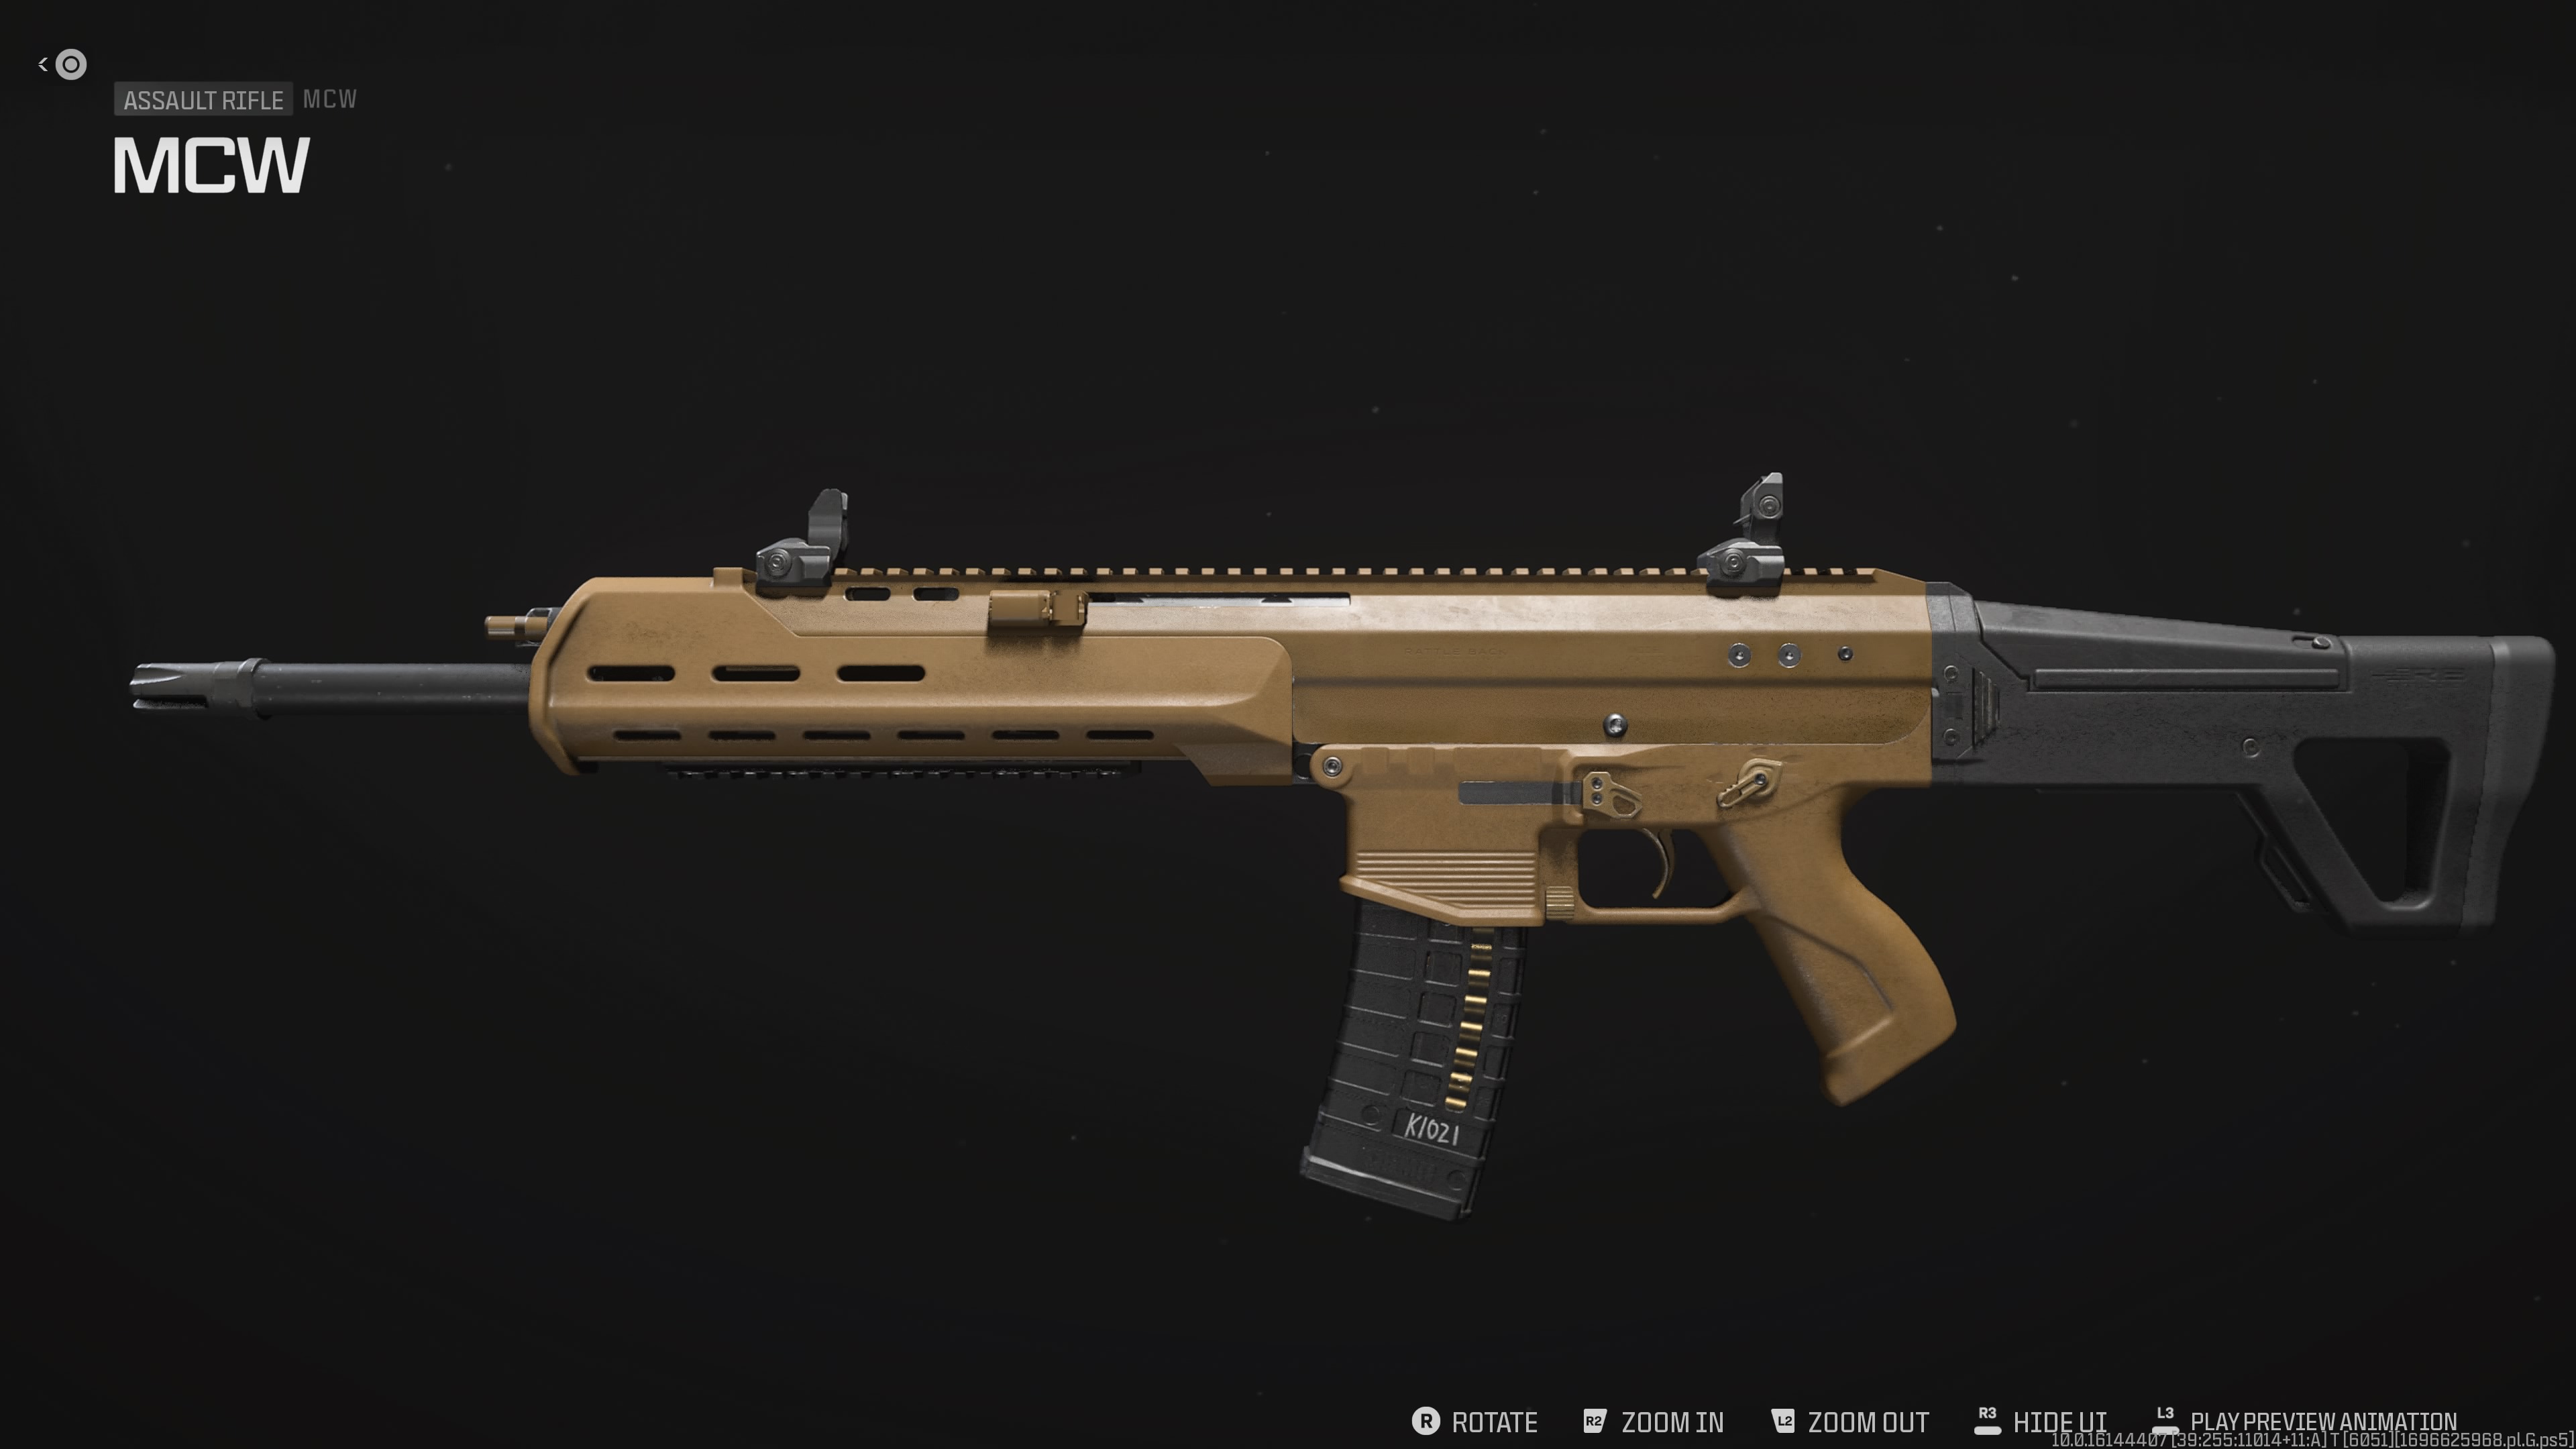 An image of the MCW assault rifle in Modern Warfare 3.